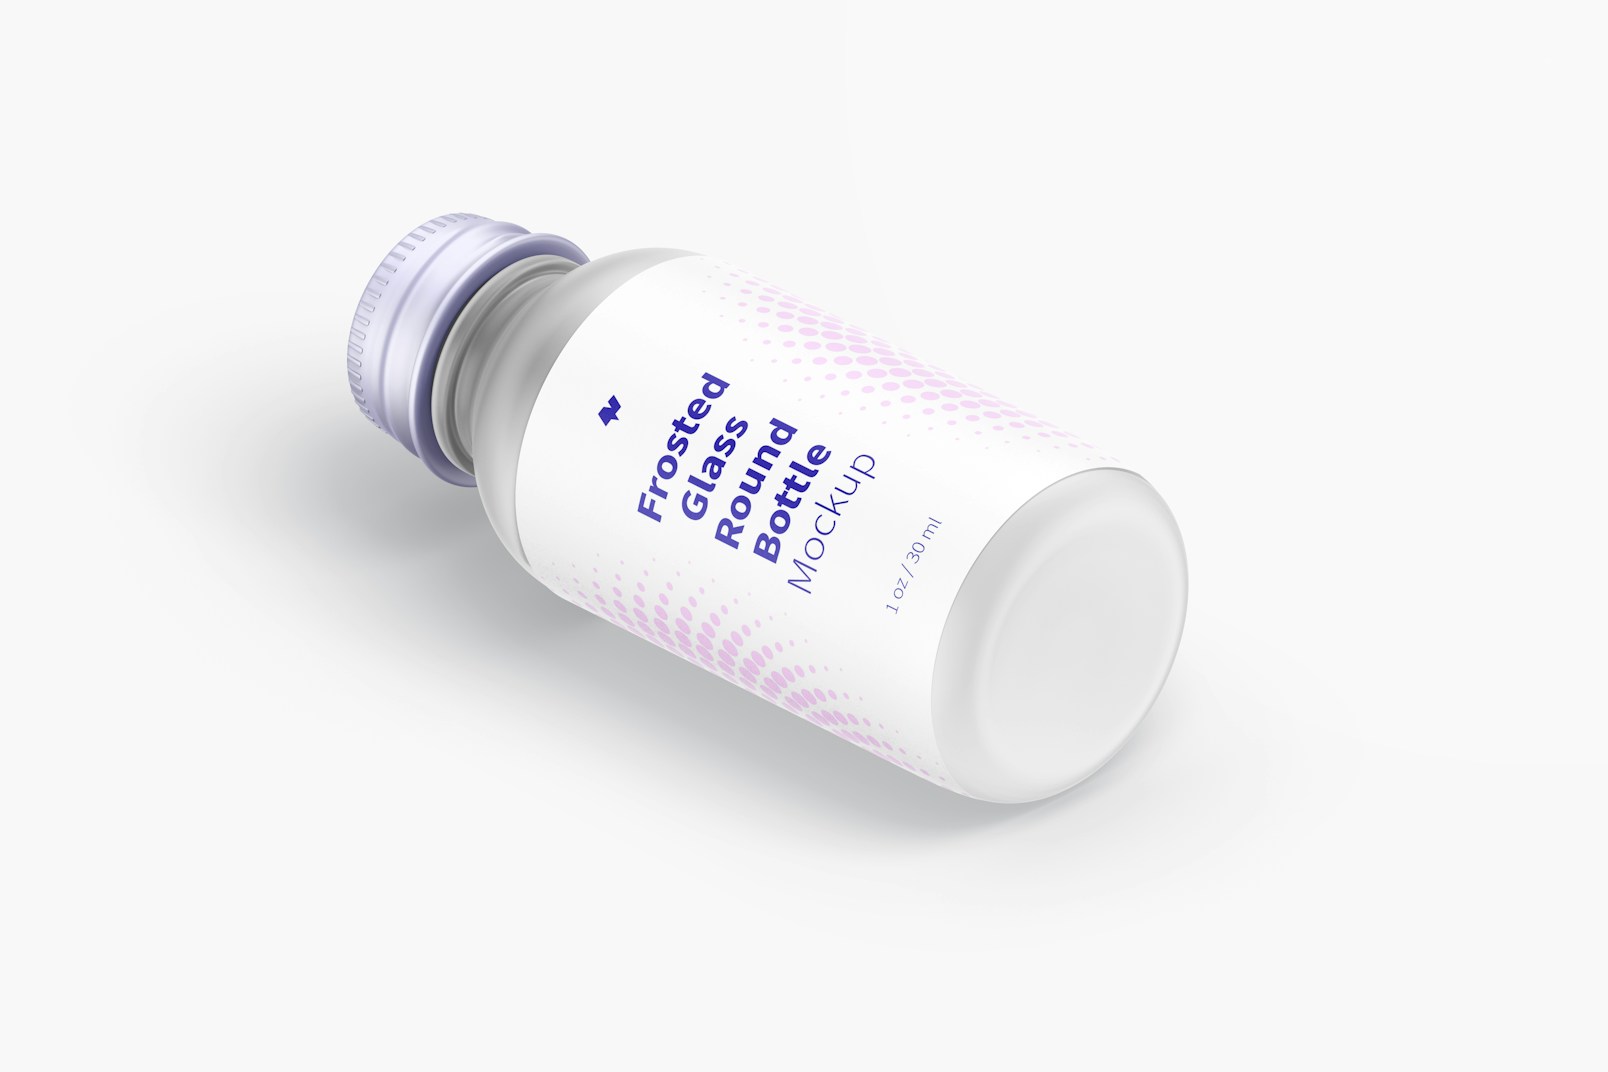 1 oz Frosted Glass Round Bottle Mockup, Isometric Left View